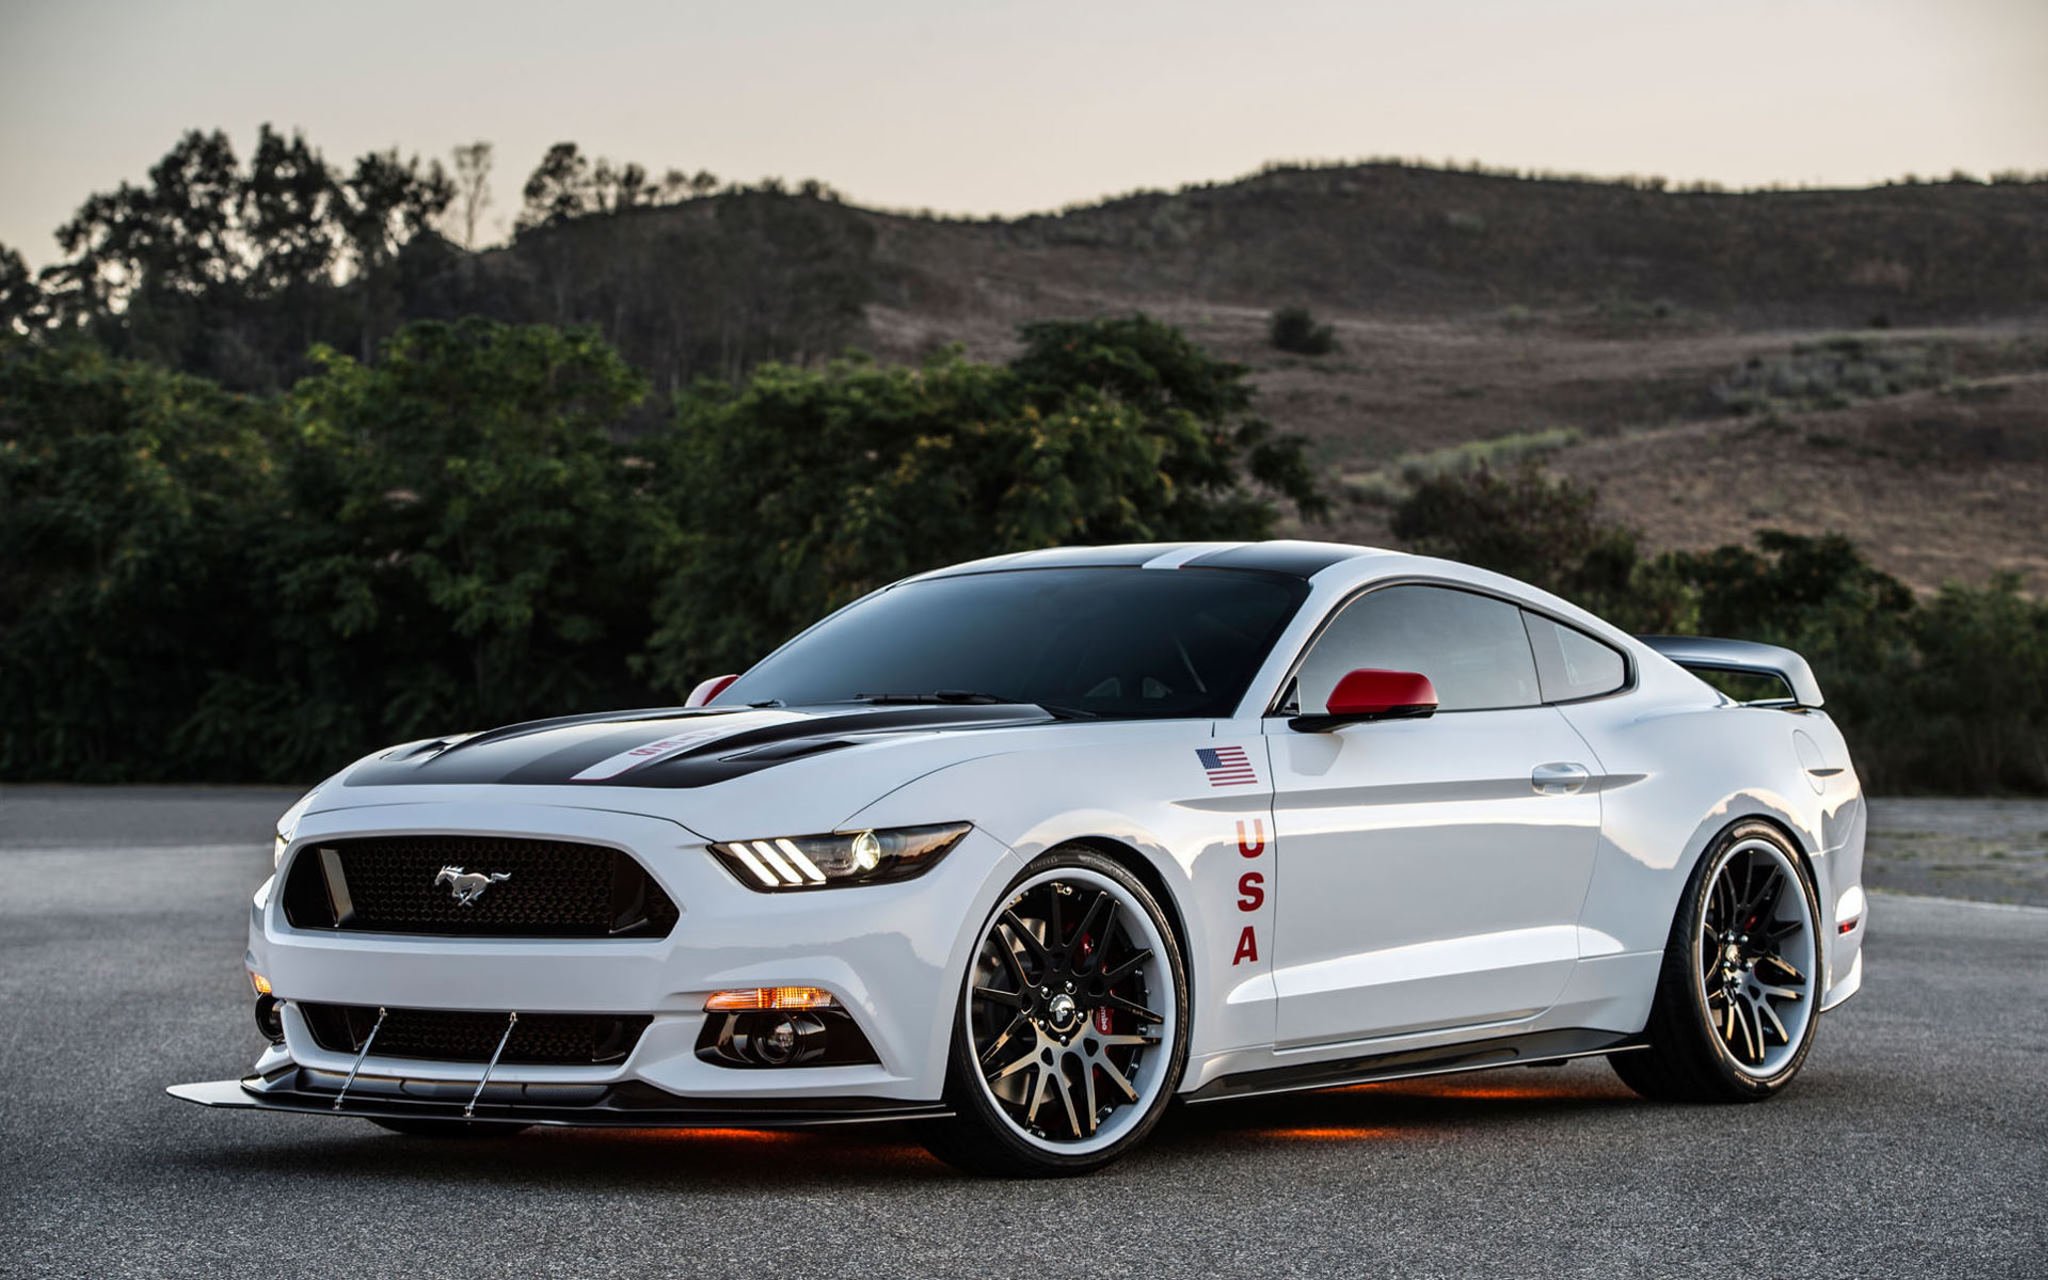 2015, Ford, Mustang, Gt, Apollo, Edition, Muscle, Supercar, Usa,  02 Wallpaper